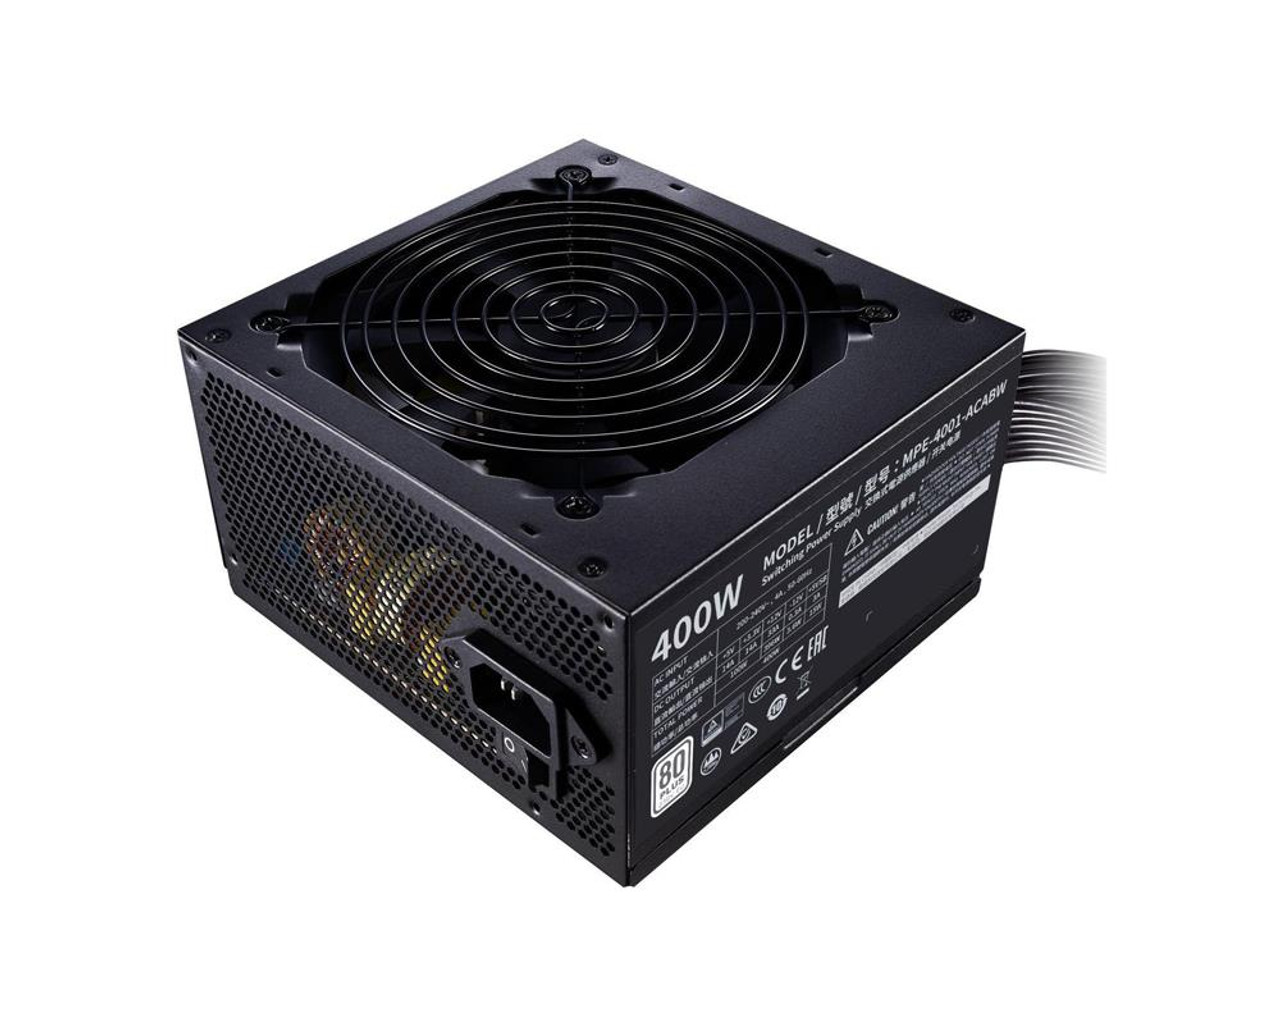 MPE-4001-ACABW Cooler Master 400-Watts EPS12V Power Supply